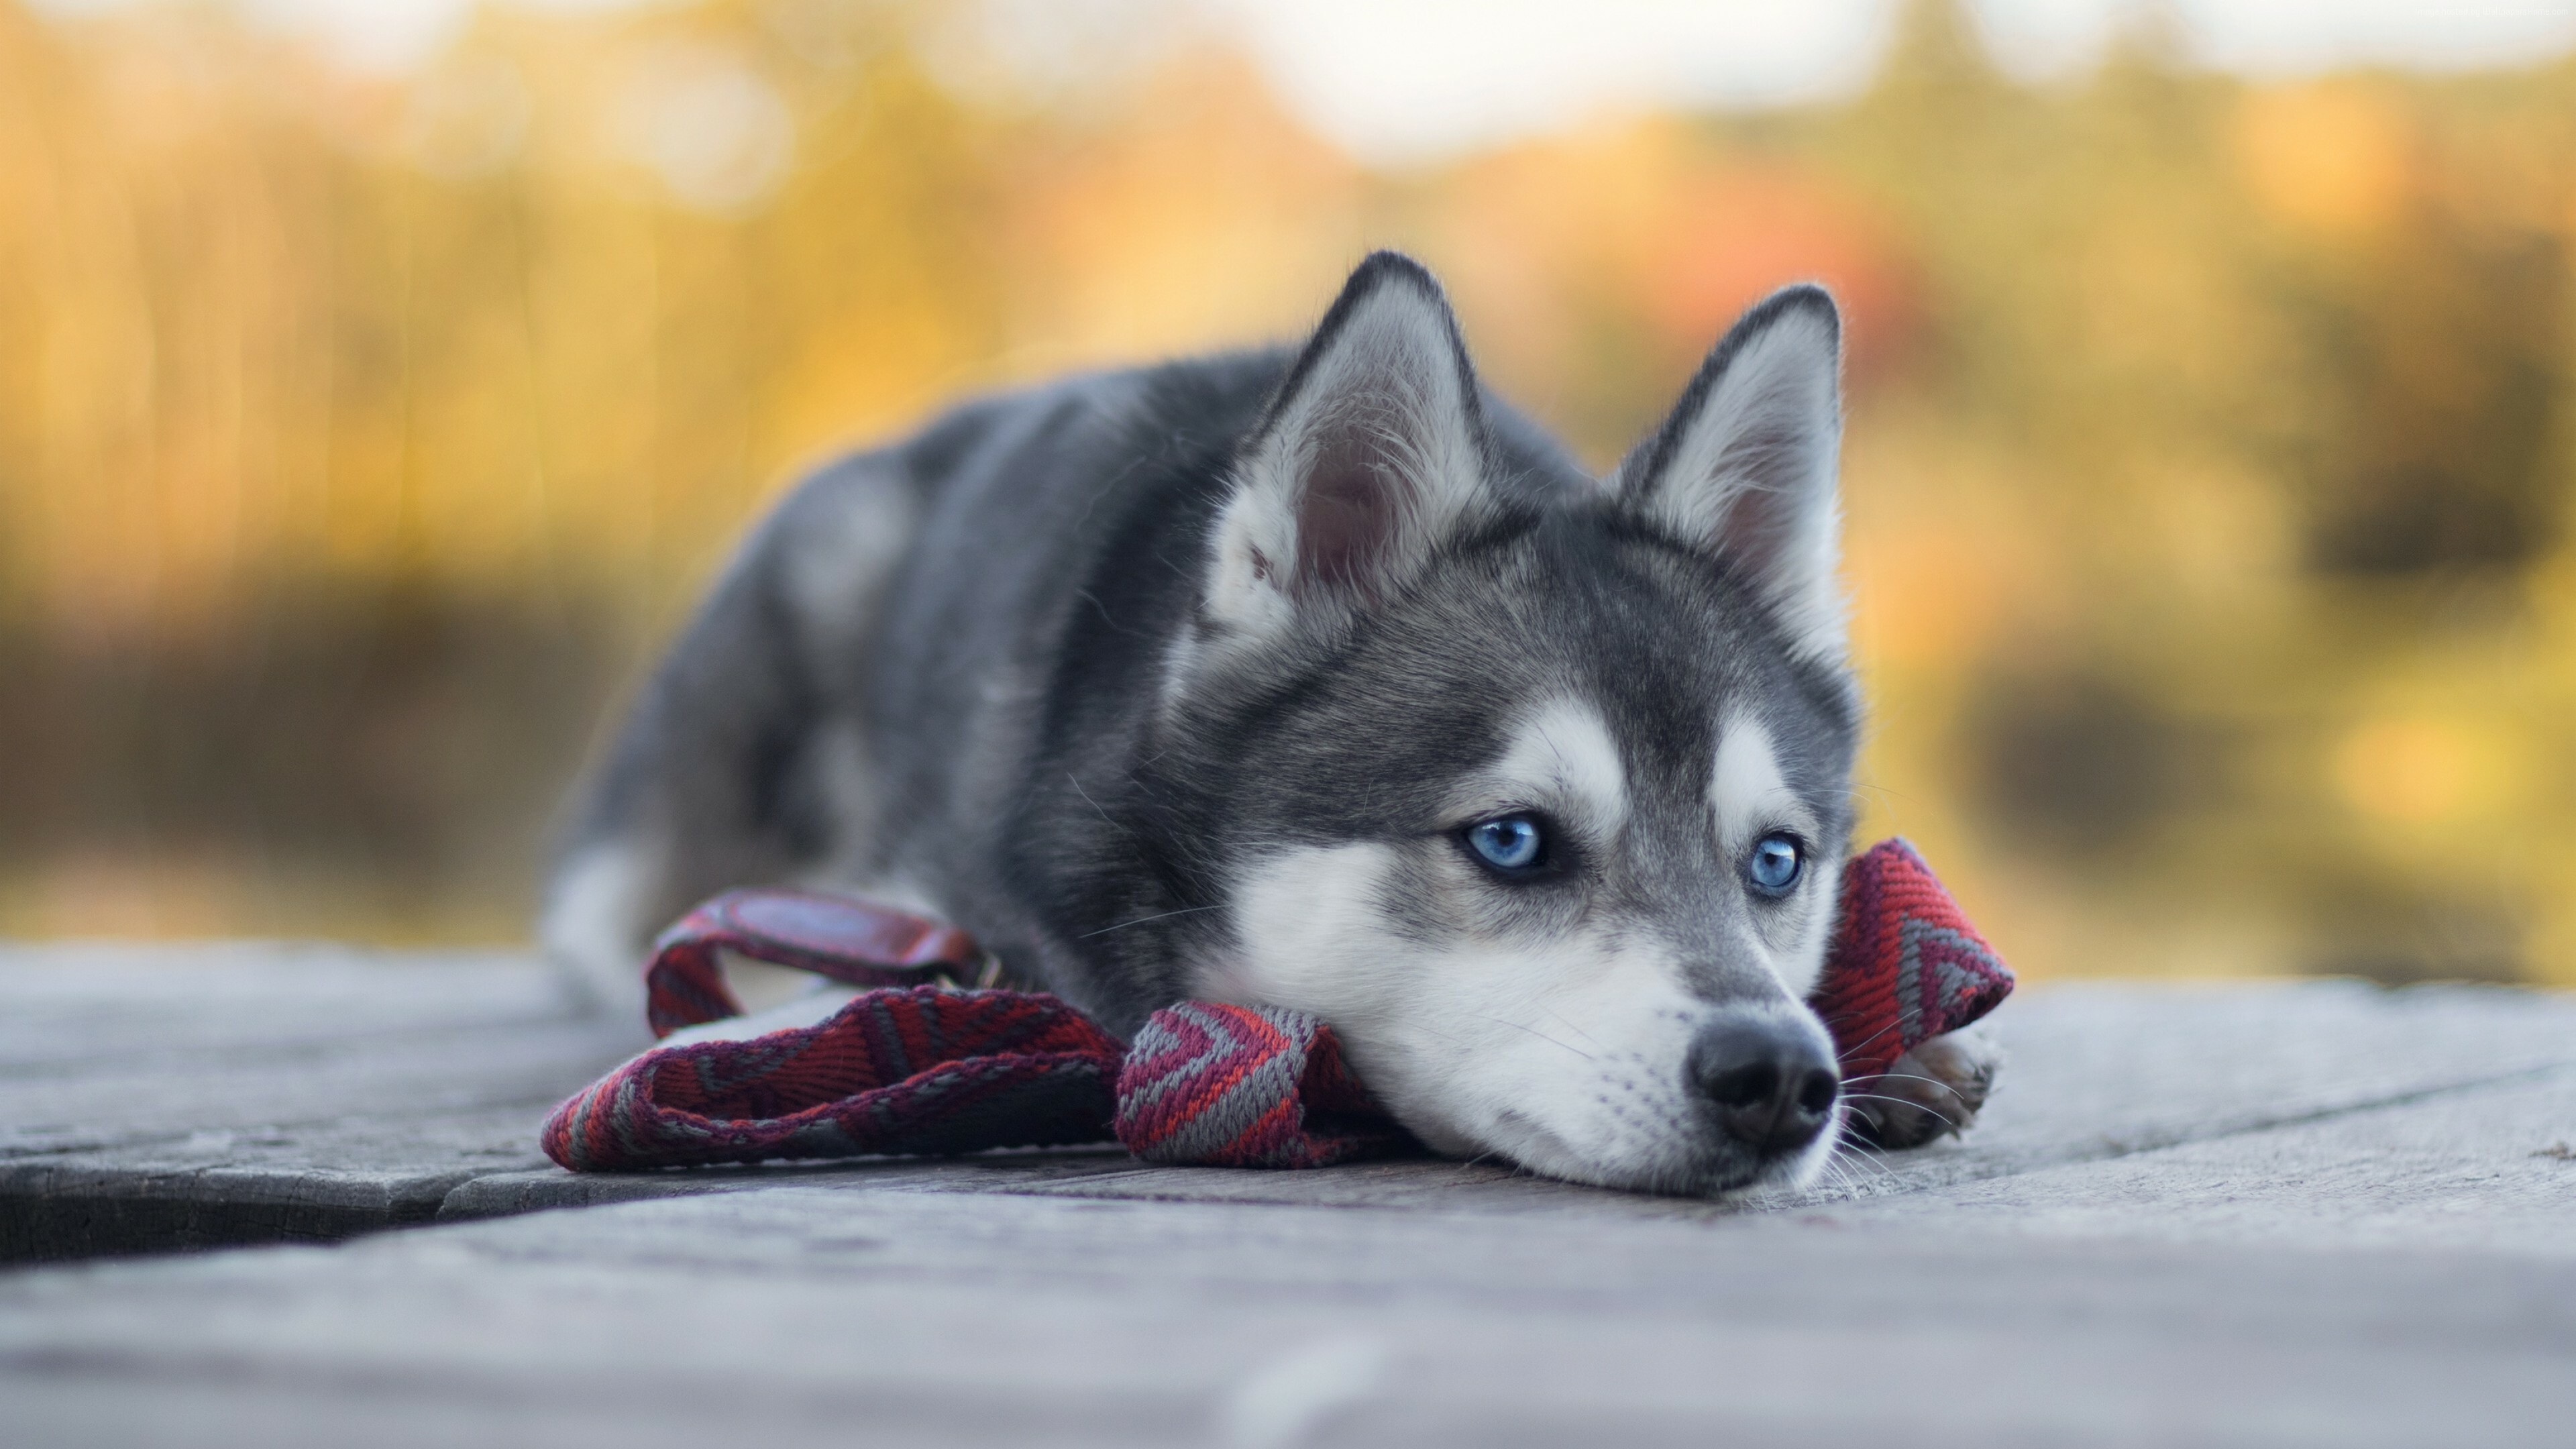 Dog: Alaskan Klee Kai, Bred in three sizes, its weight range is from 5 to 22 pounds as an adult. 3840x2160 4K Wallpaper.